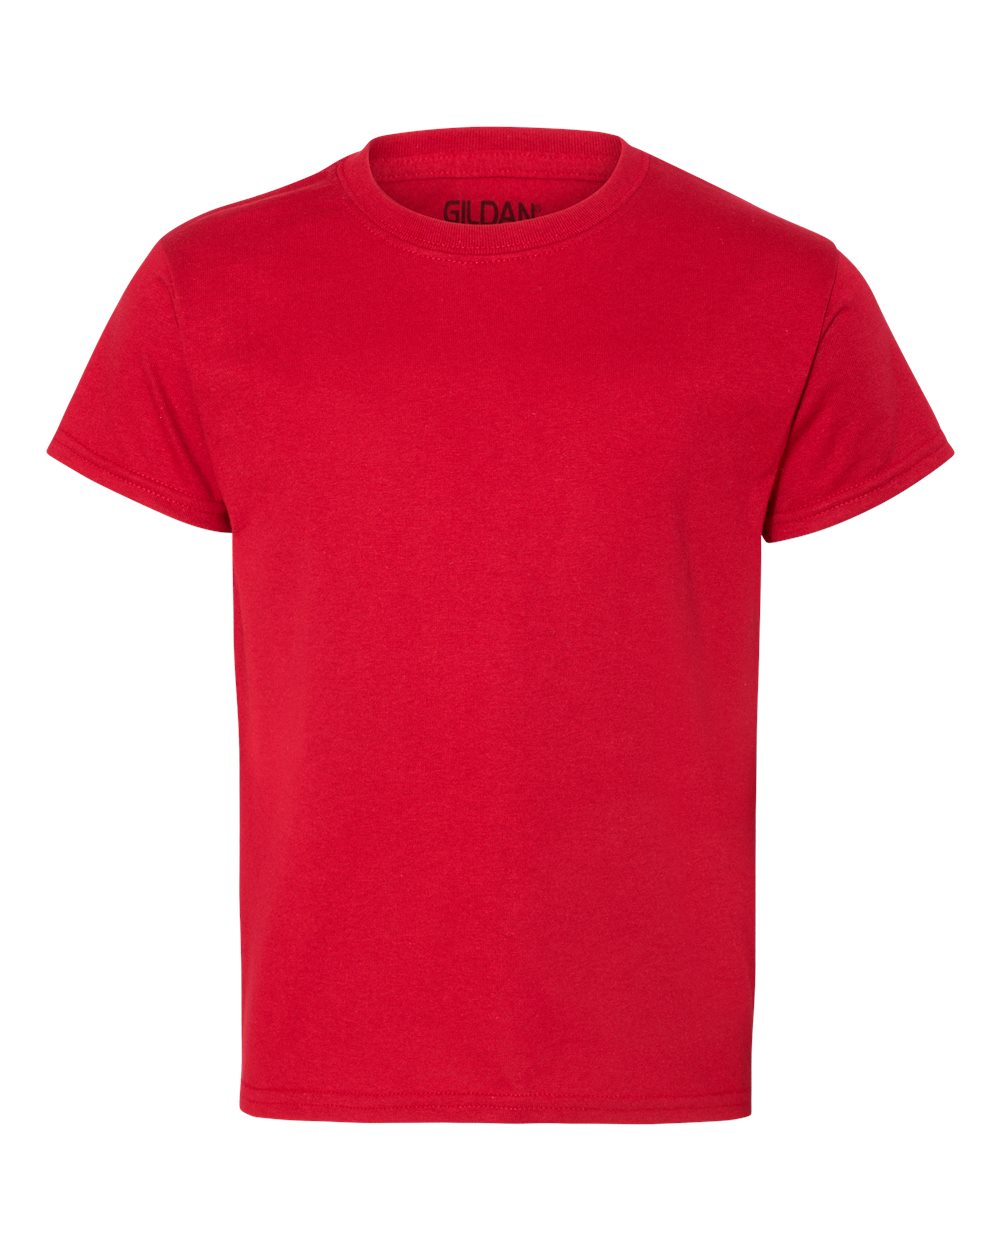 click to view Sport Scarlet Red